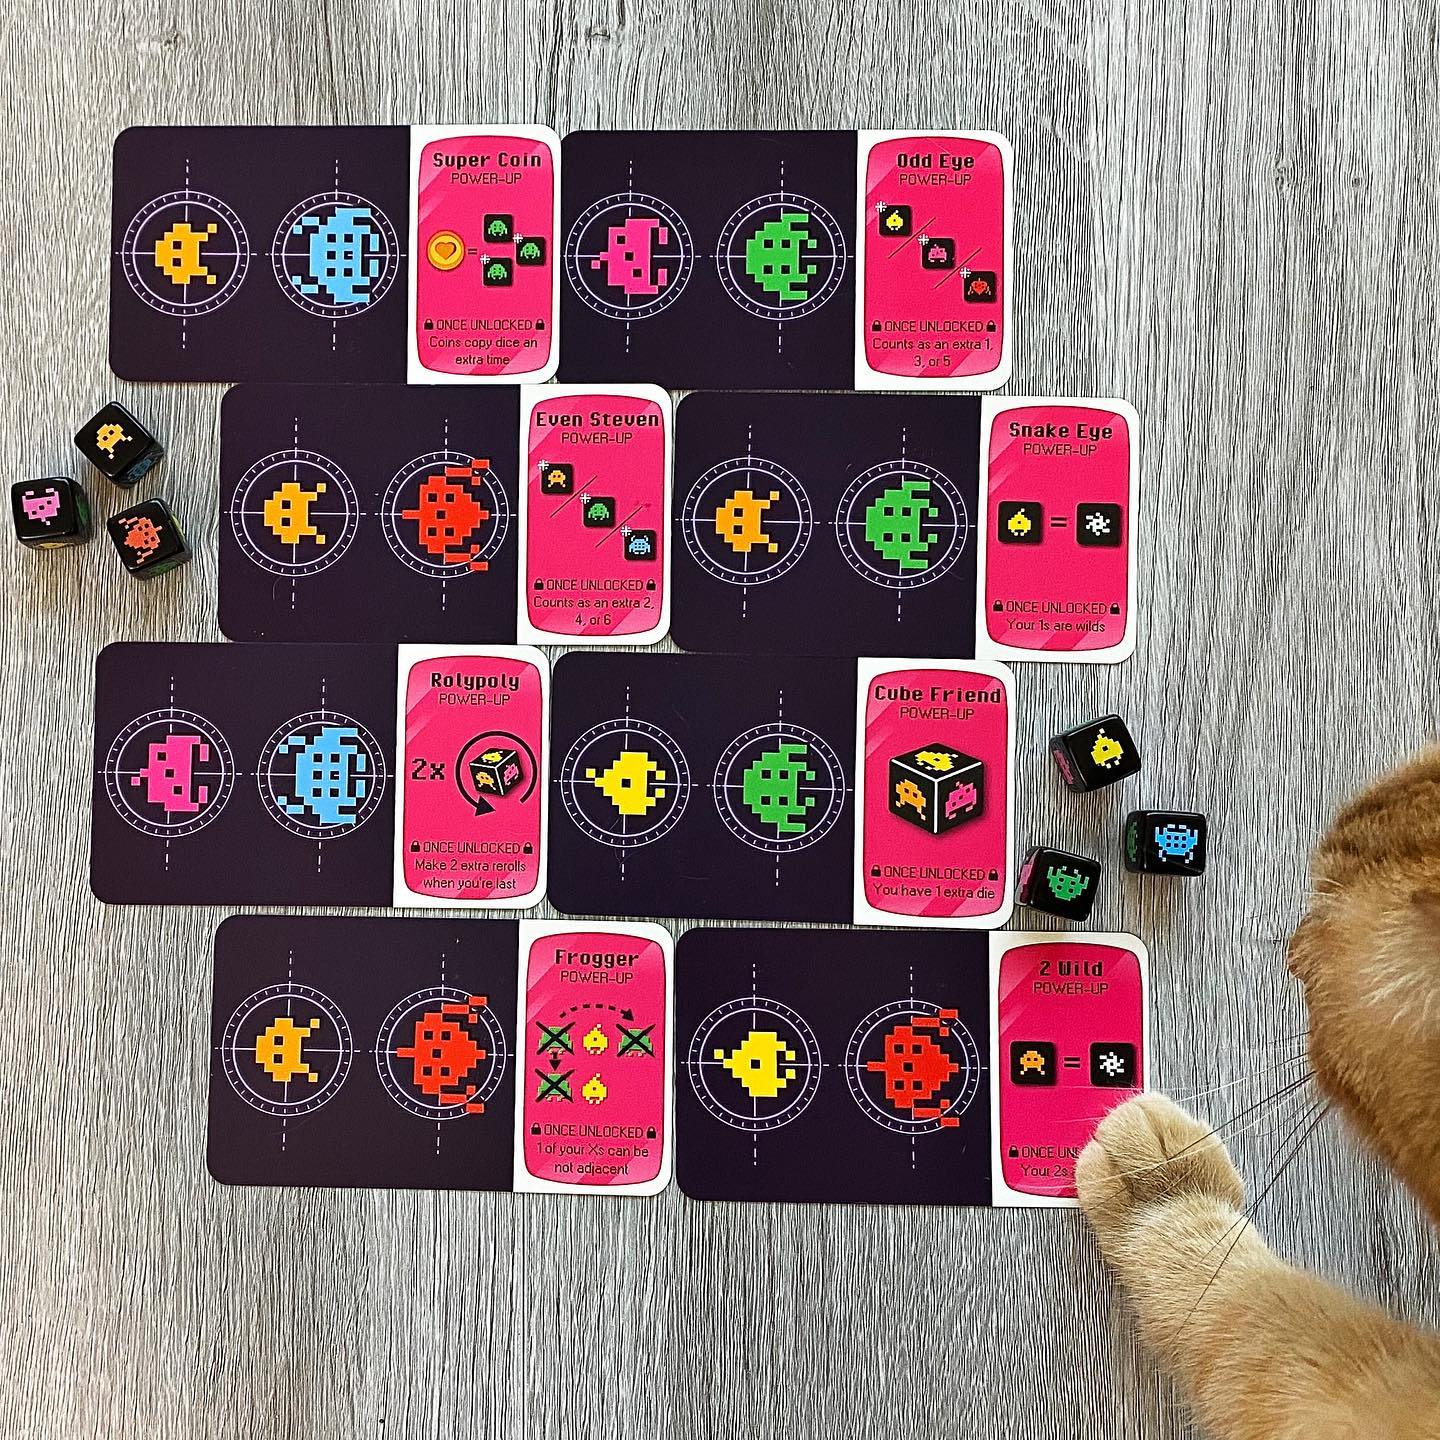 Which of the eight Retrograde power ups would be your go-to for blasting Droids? Glitch the cat here really likes the 2 Wild ✌🏻

#boardgames #bgg #boardgamephotography #gamenight #indieboardgames #boardgaming #familygamenight #boardgamegeek #boardgamesofinstagram #resonym #cardlayout #dice #arcade #power #powerup #retro #retroaesthetic #cat